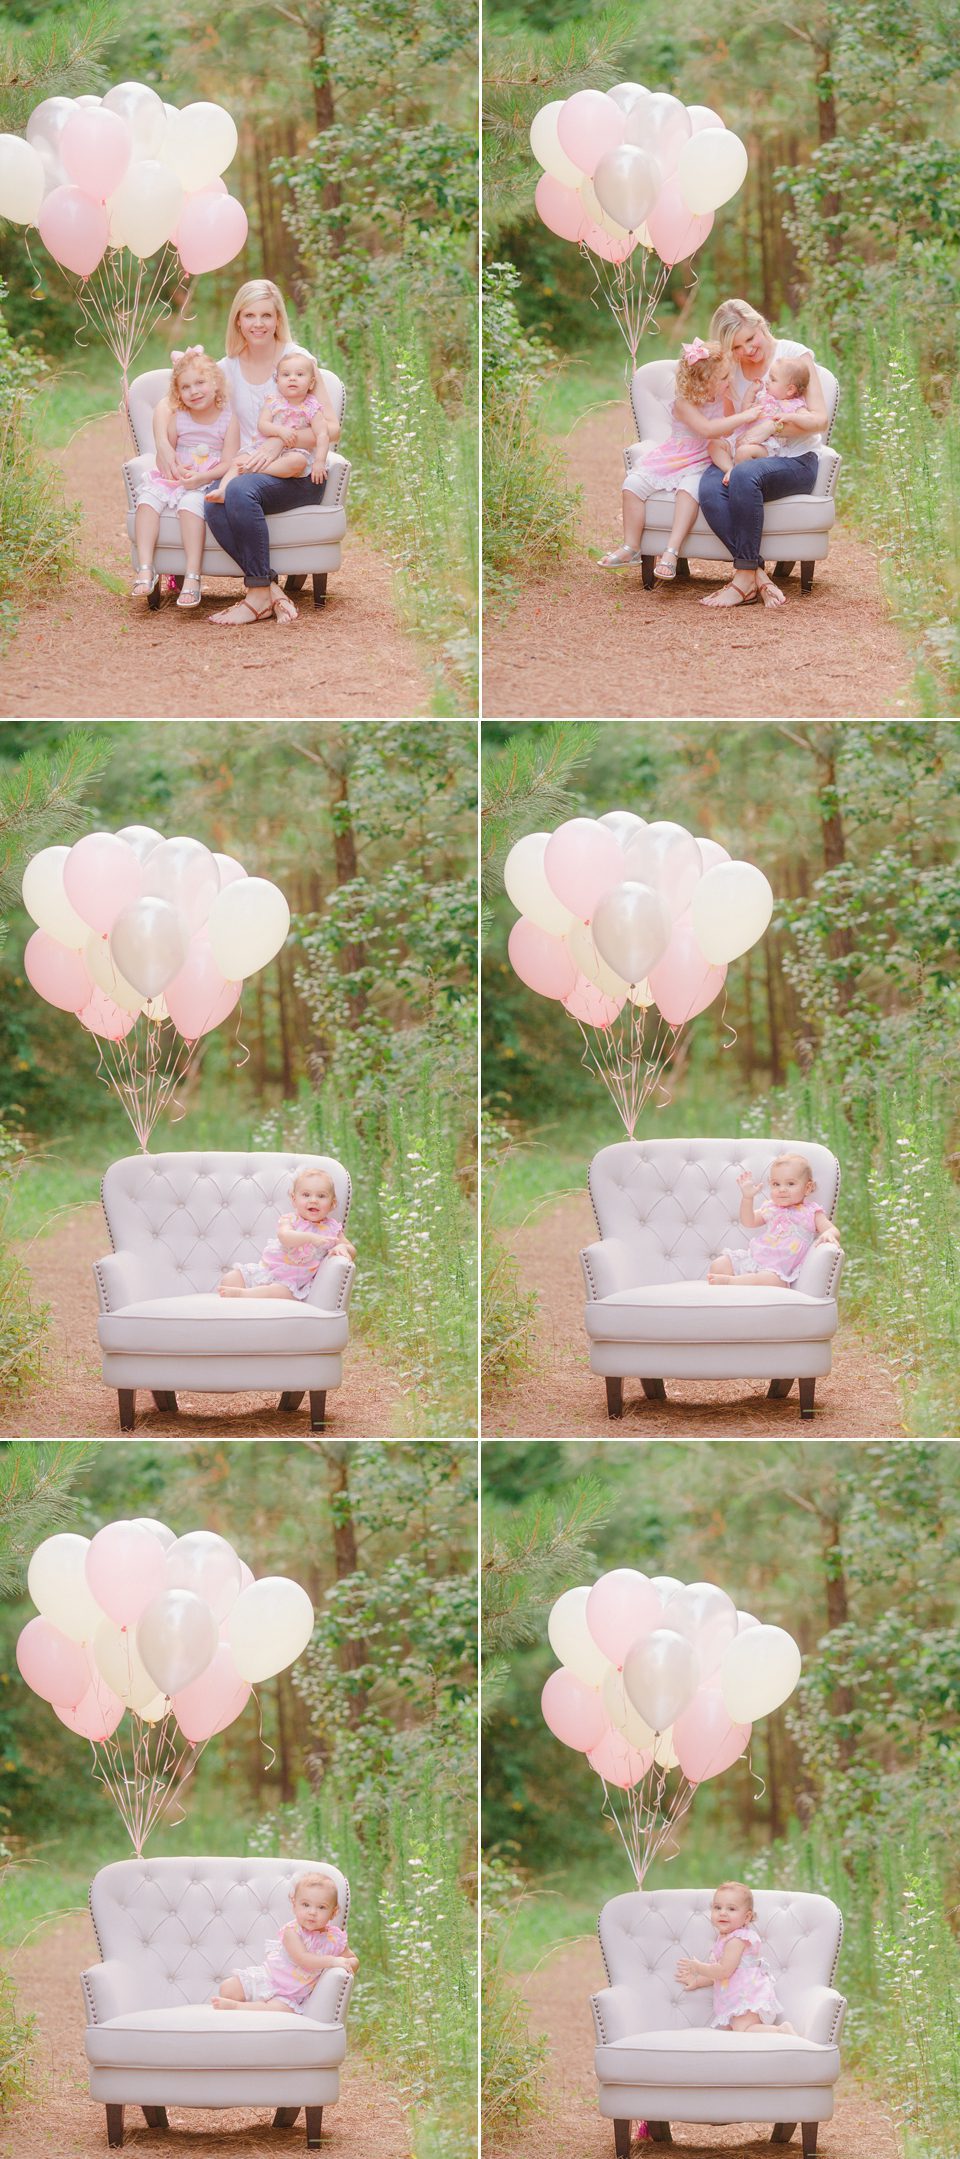 Baby's first birthday portraits on a chair with balloons in Oconee County, GA.